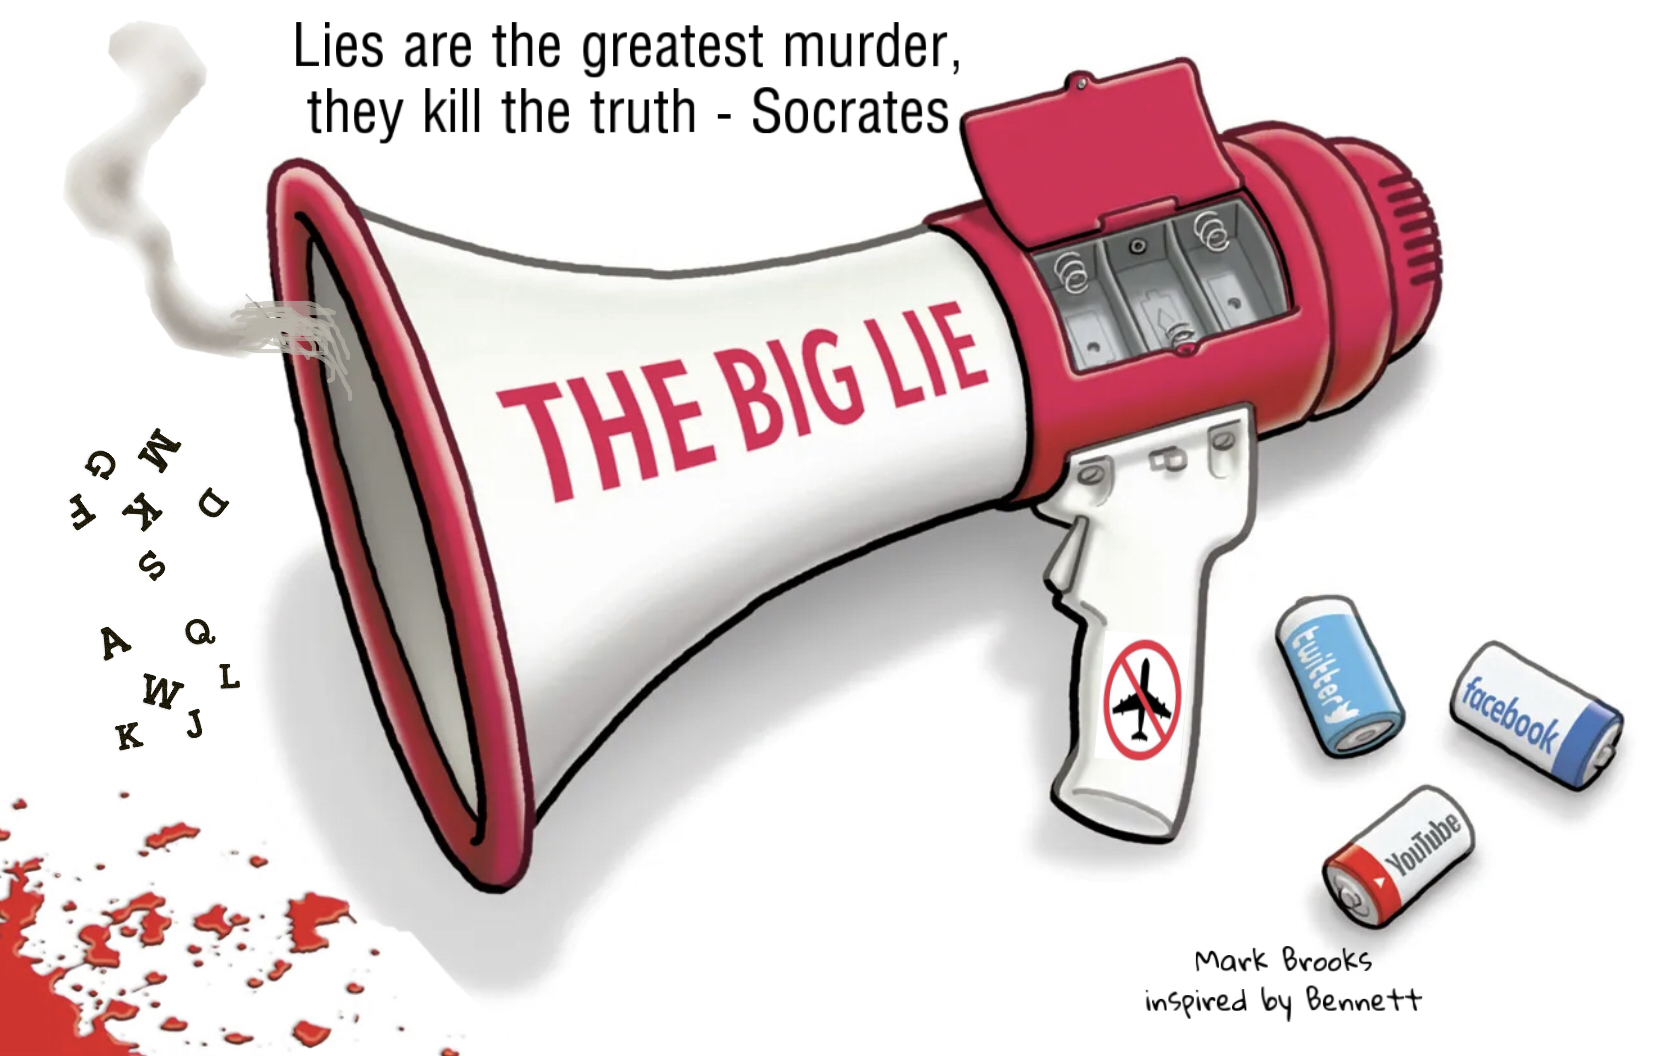 “The Big Lie” But Who is Telling It?!